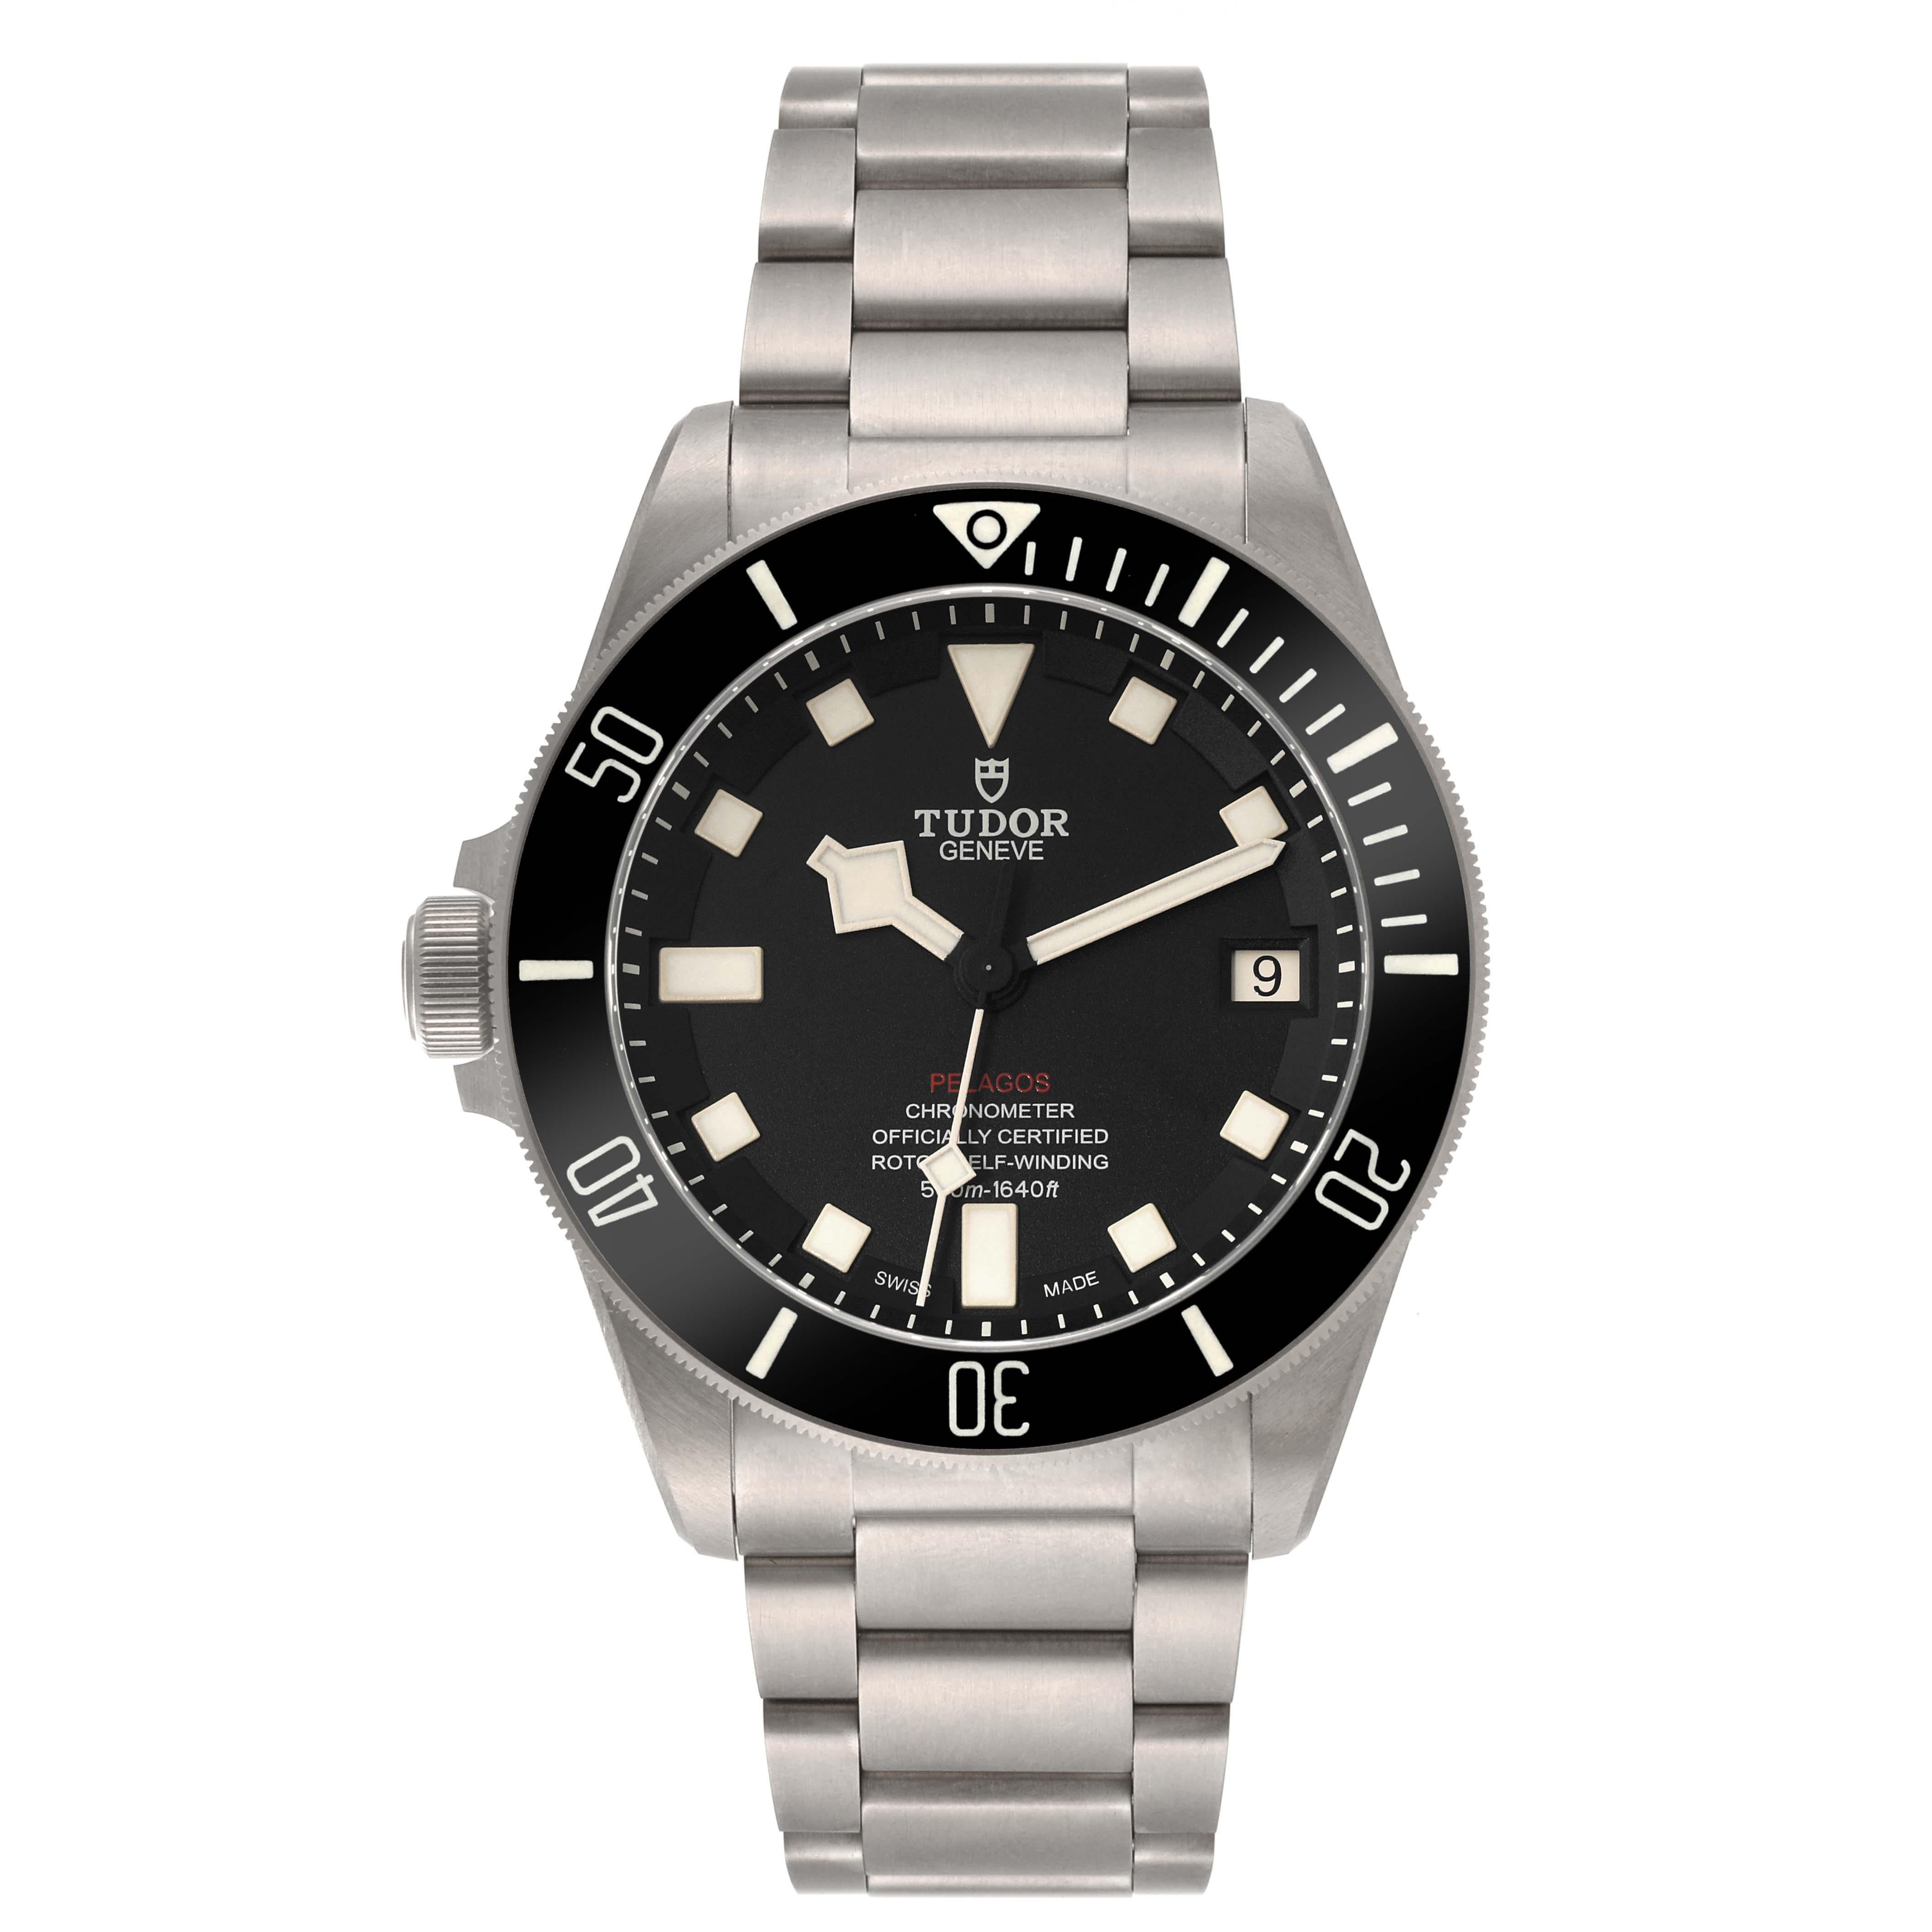 Tudor Pelagos 42mm LHD Titanium Steel Mens Watch 25610 Unworn. Automatic self-winding movement. Titanium and steel case 42 mm in diameter. Tudor logo on a crown. Pointed crown guards. Unidirectional rotating 60 minute graduated bezel with black